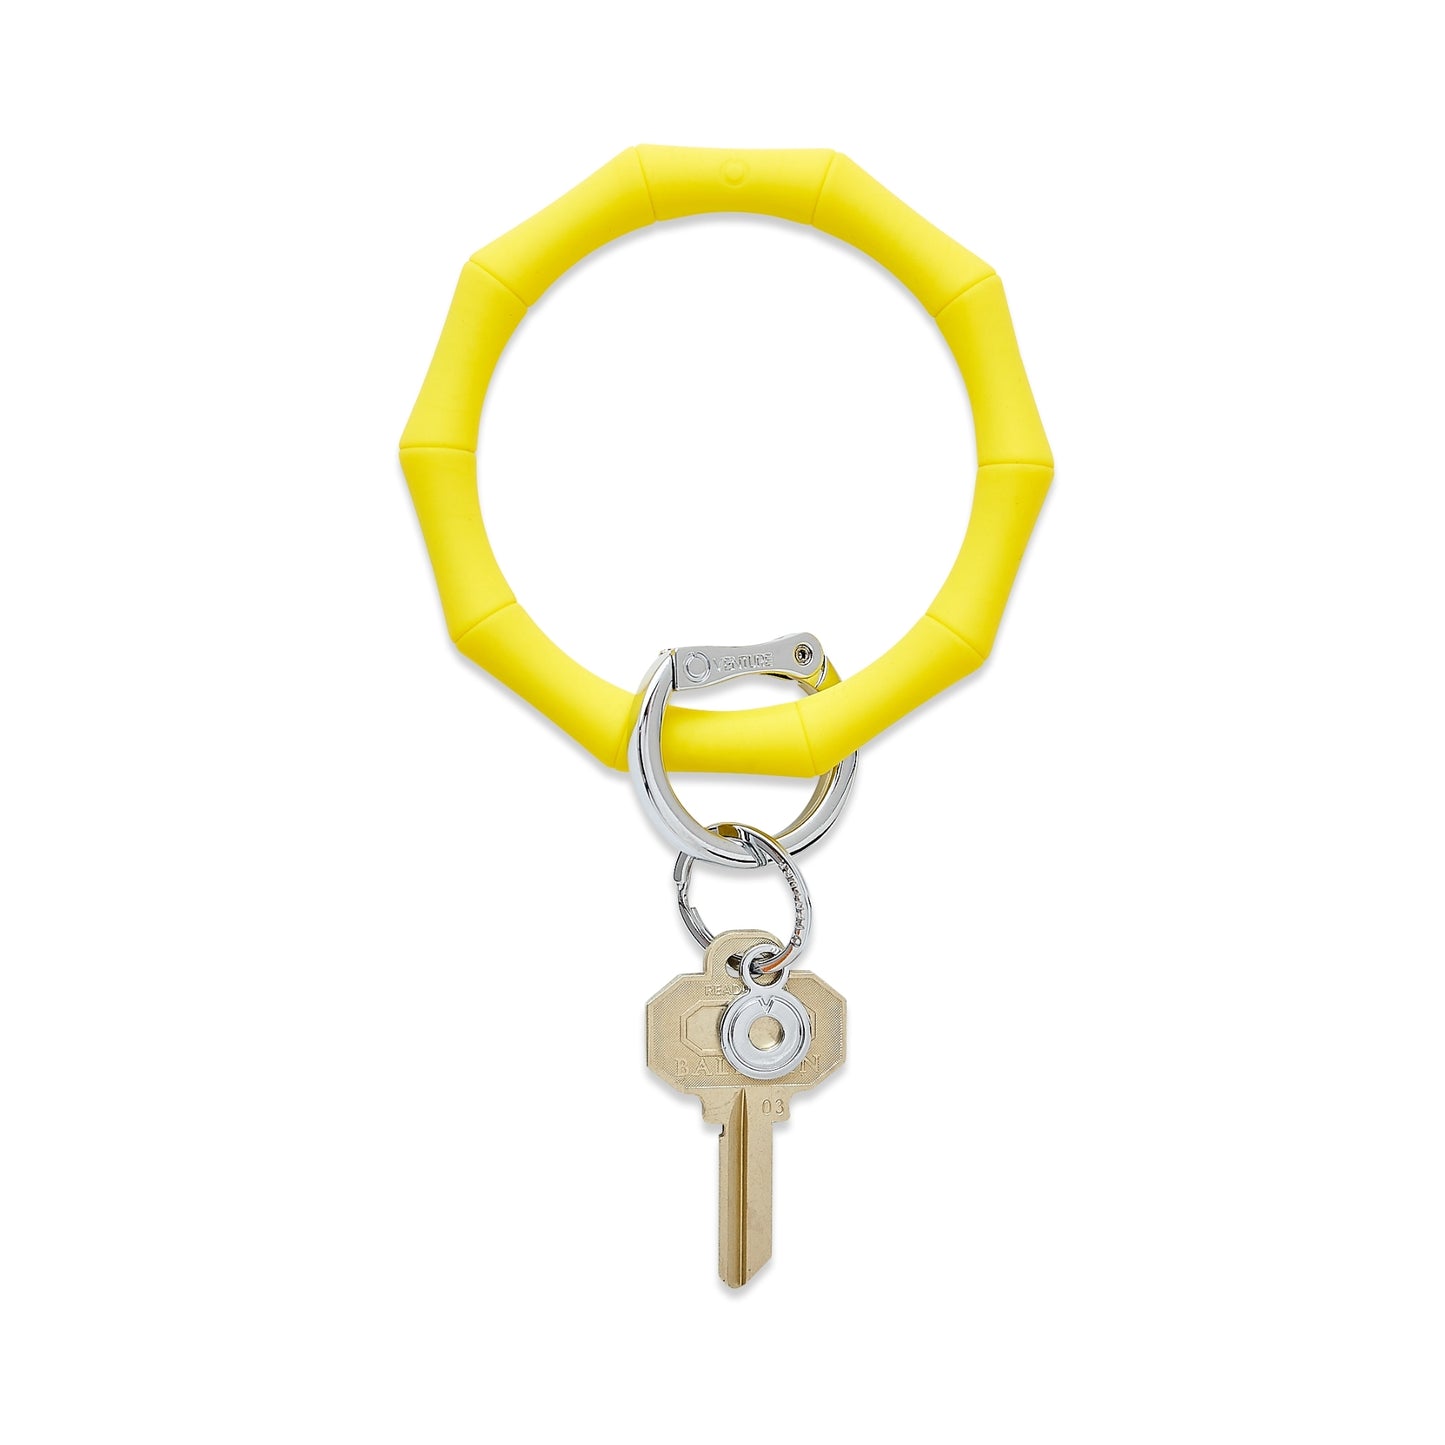 Bright yellow bamboo silicone big o key ring with silver hardware